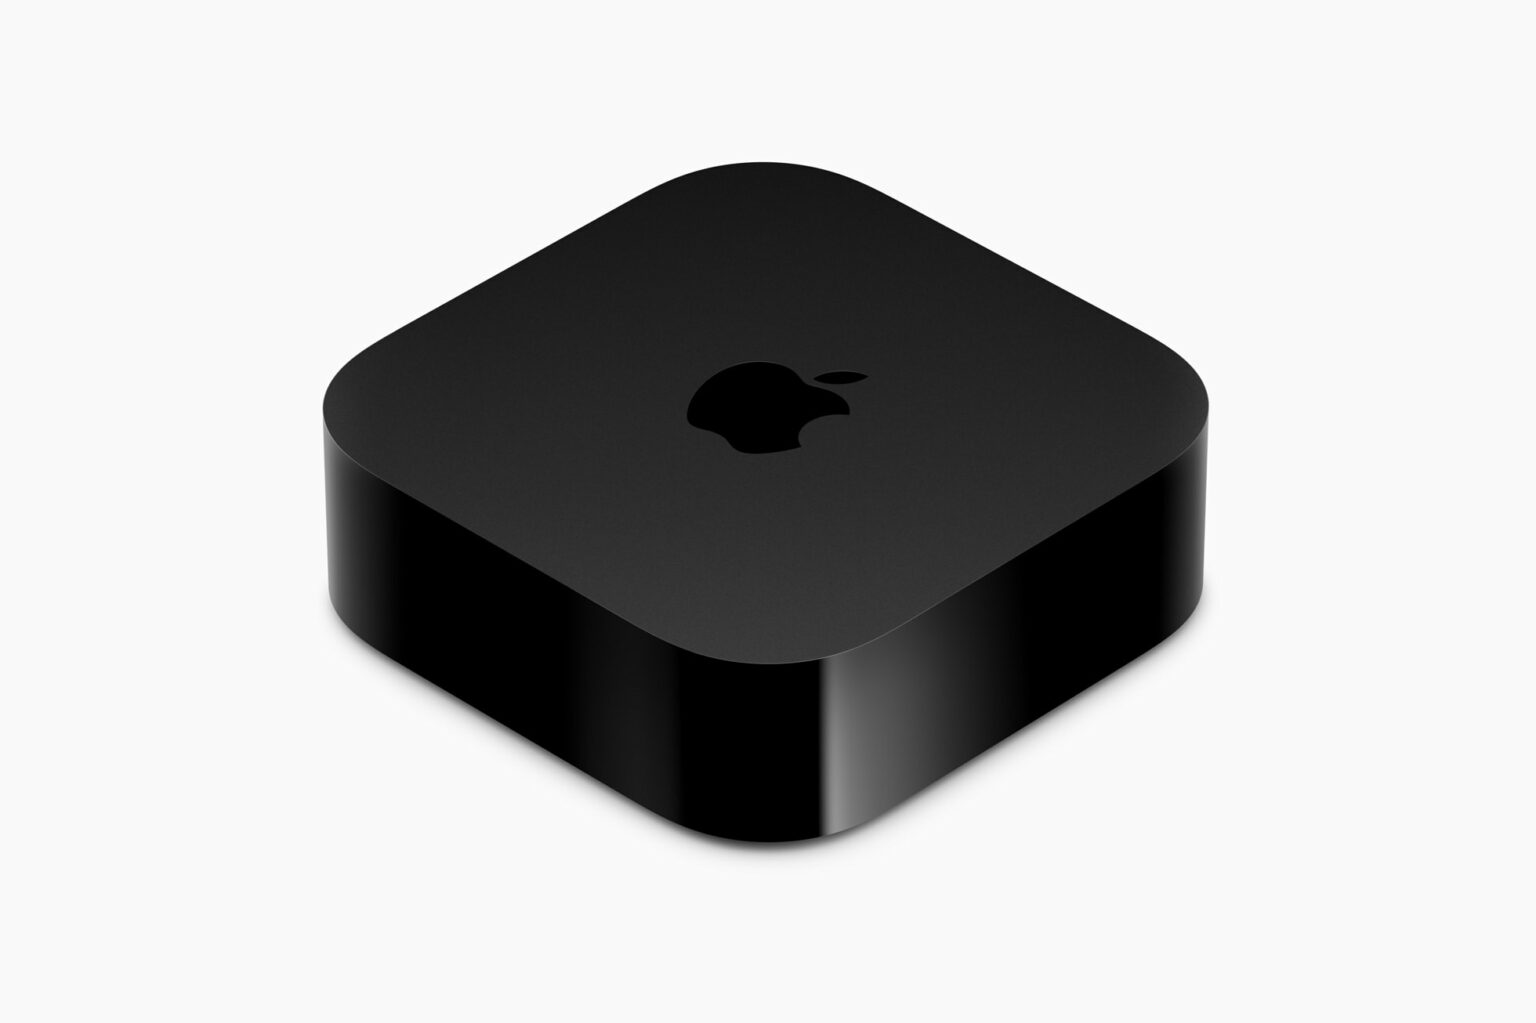 Apple TV 4K 2022 launch: With an A15 Bionic chip inside a slightly smaller form factor, the new Apple TV 4K performs better yet is more energy efficient.